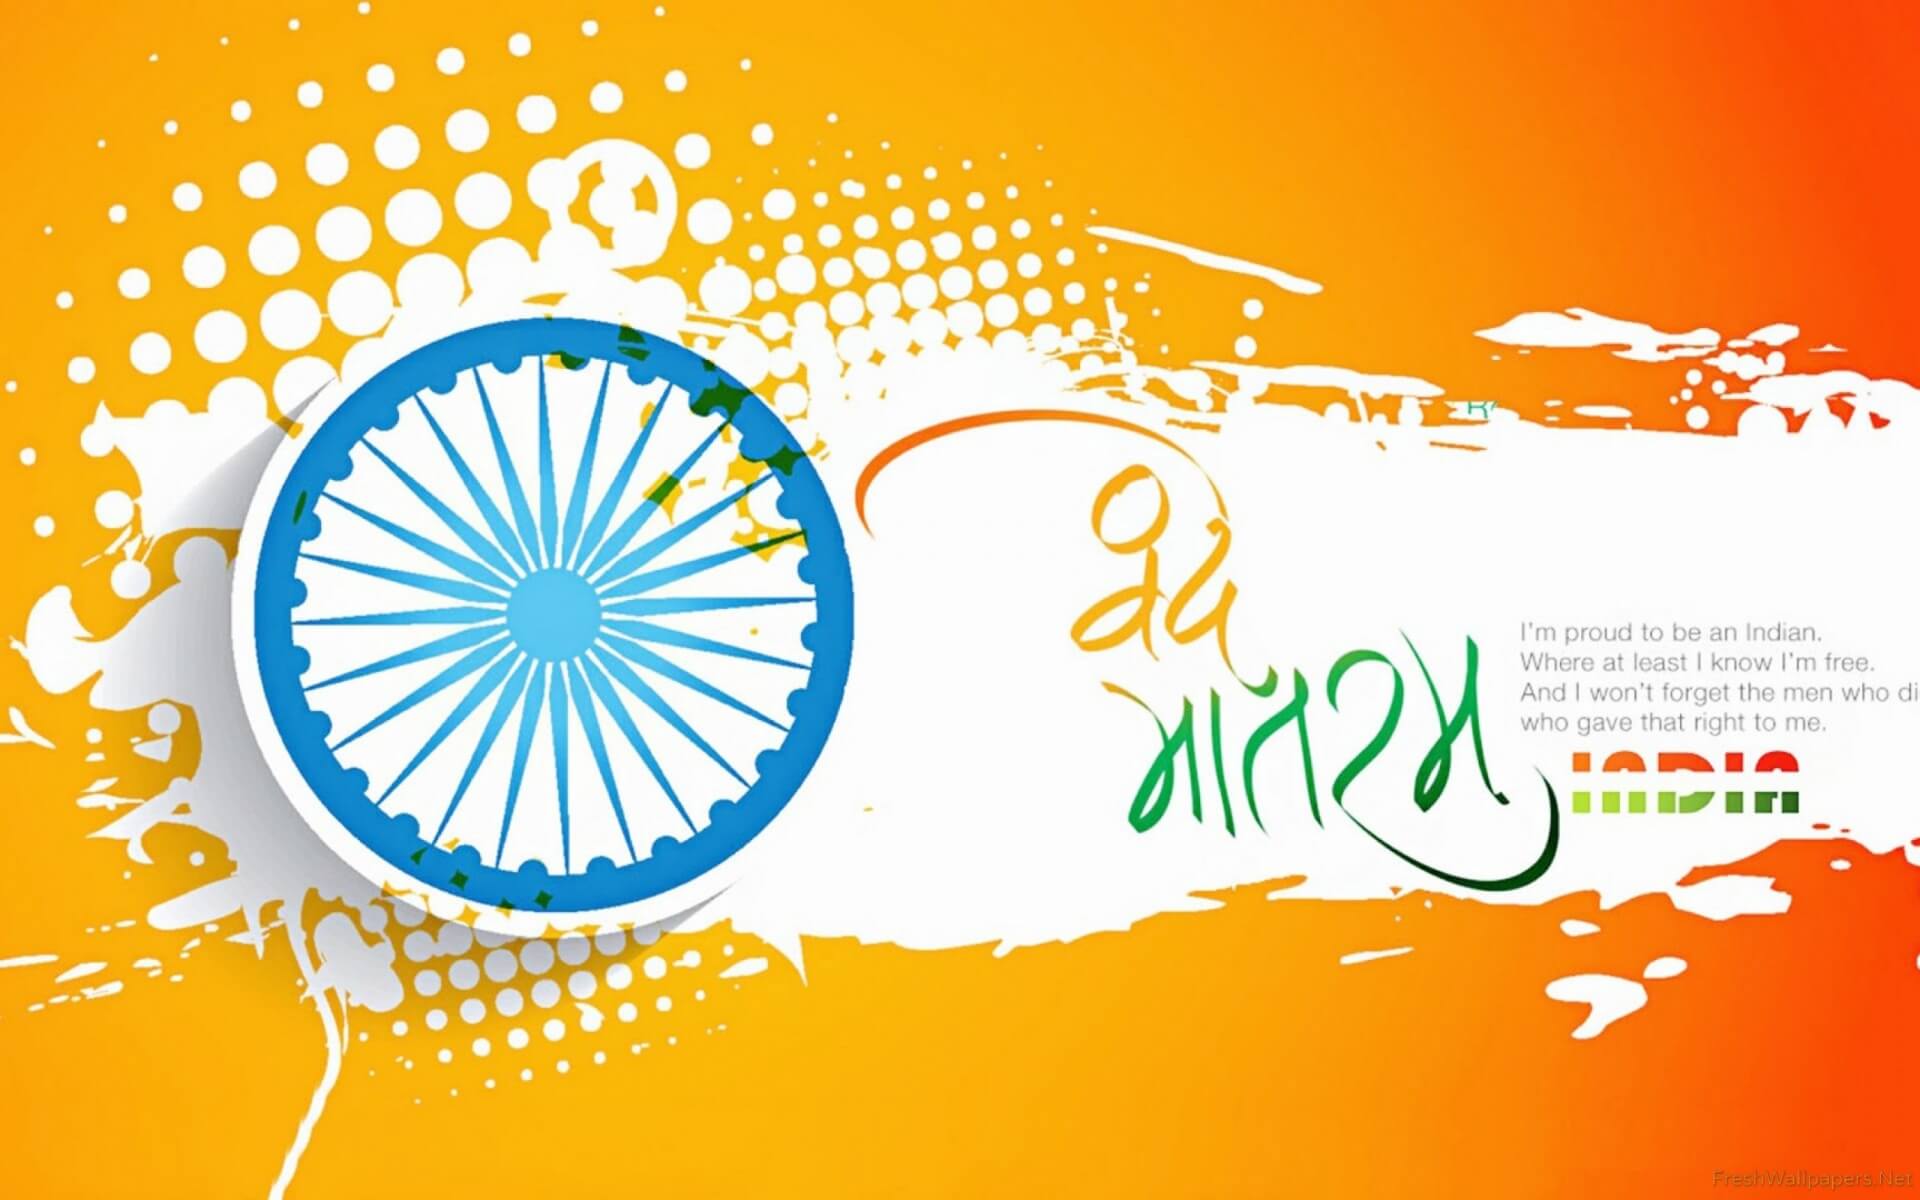 Happy Republic Day 2020: Wishes, Quotes, Shayari, Messages, SMS & Whatsapp Status